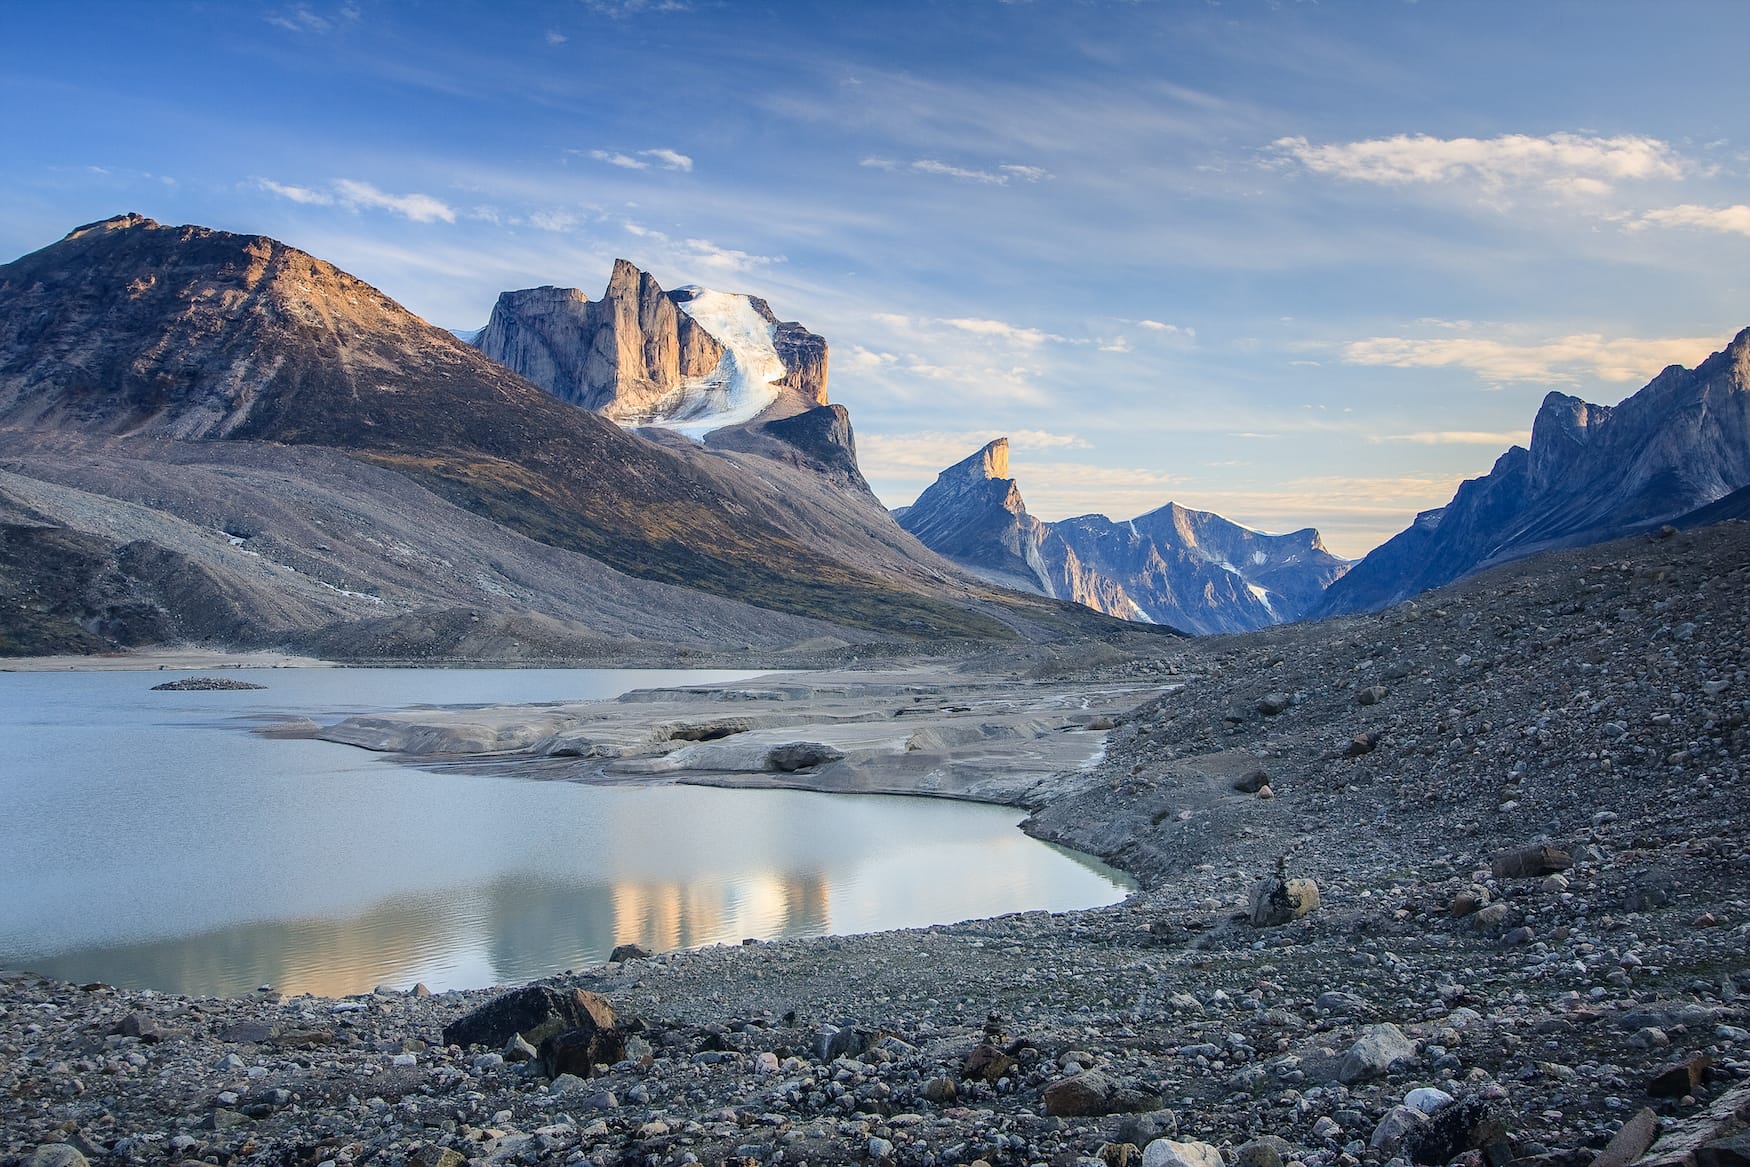 Mount Thor in a National Park in the Canadian Arctic